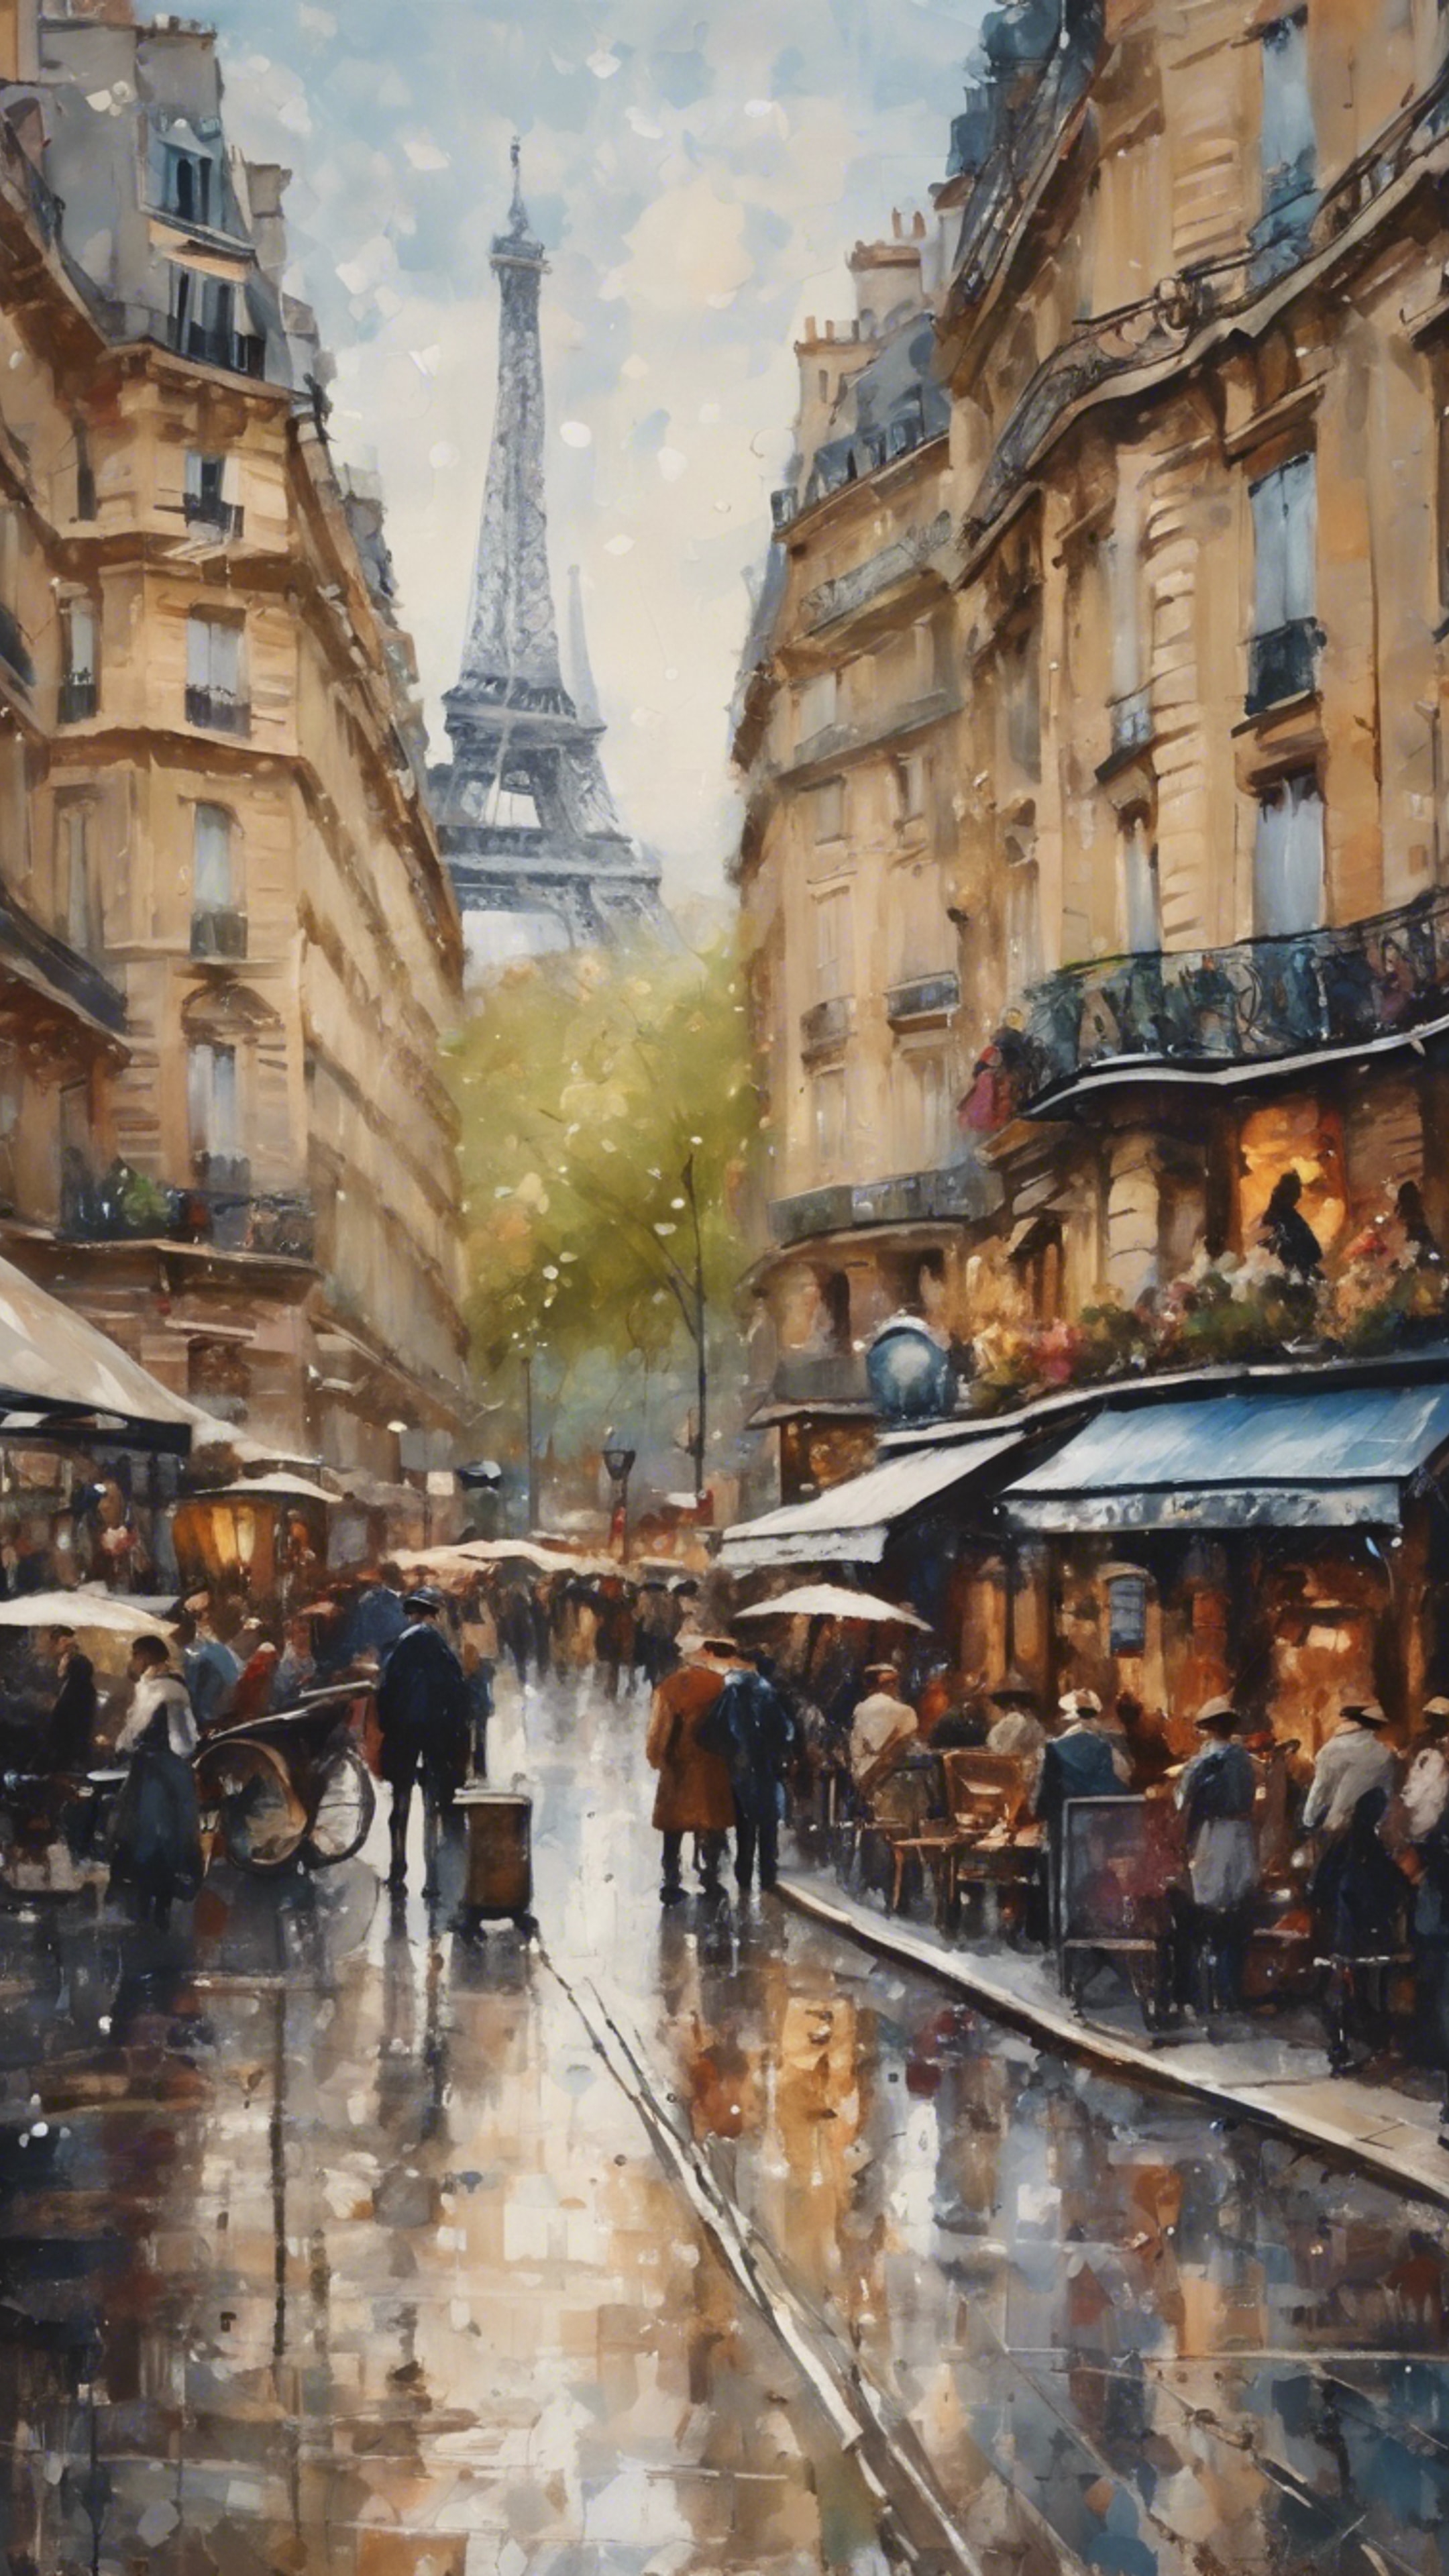 An impressionistic painting of a bustling Parisian street in the 19th century. Шпалери[cd696b103ef84e098ff4]